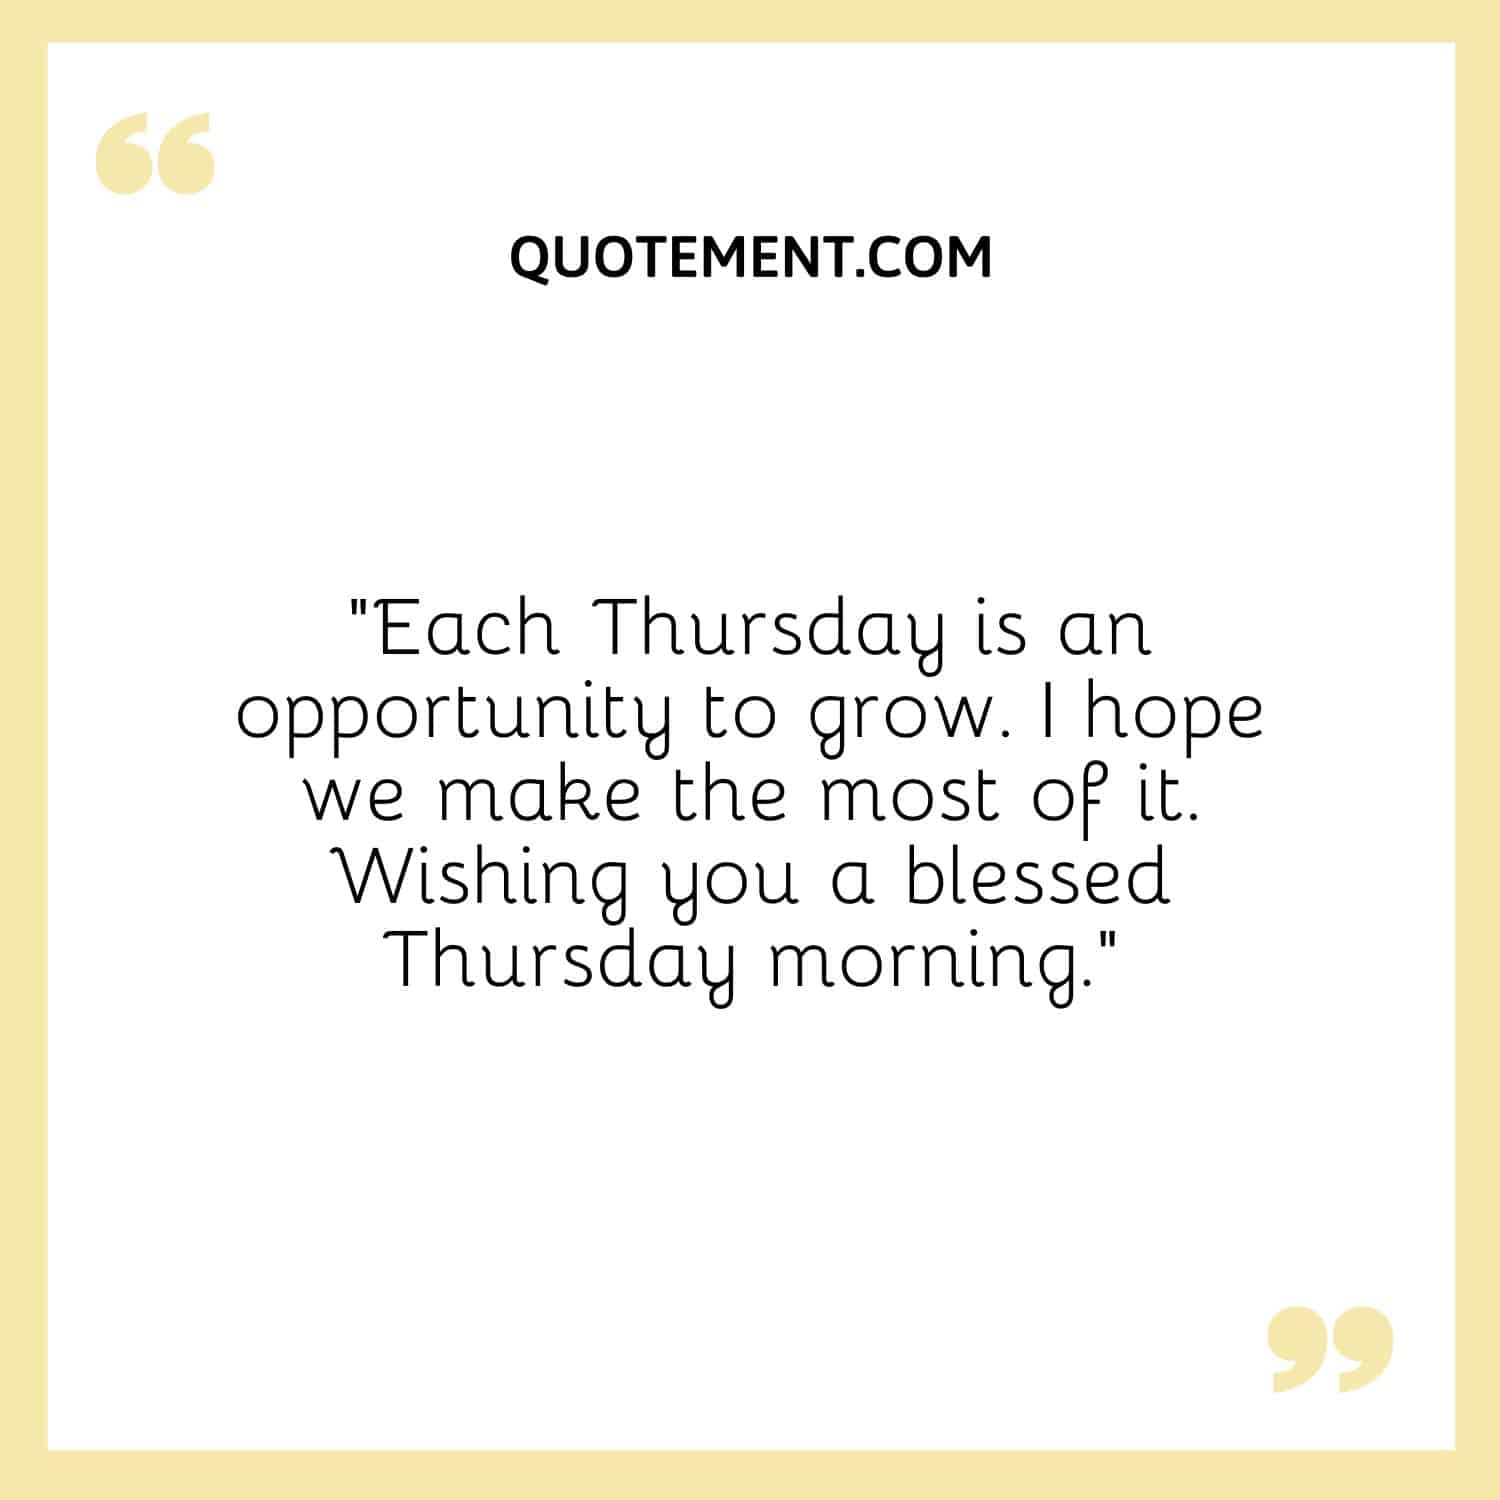 “Each Thursday is an opportunity to grow. I hope we make the most of it. Wishing you a blessed Thursday morning.”